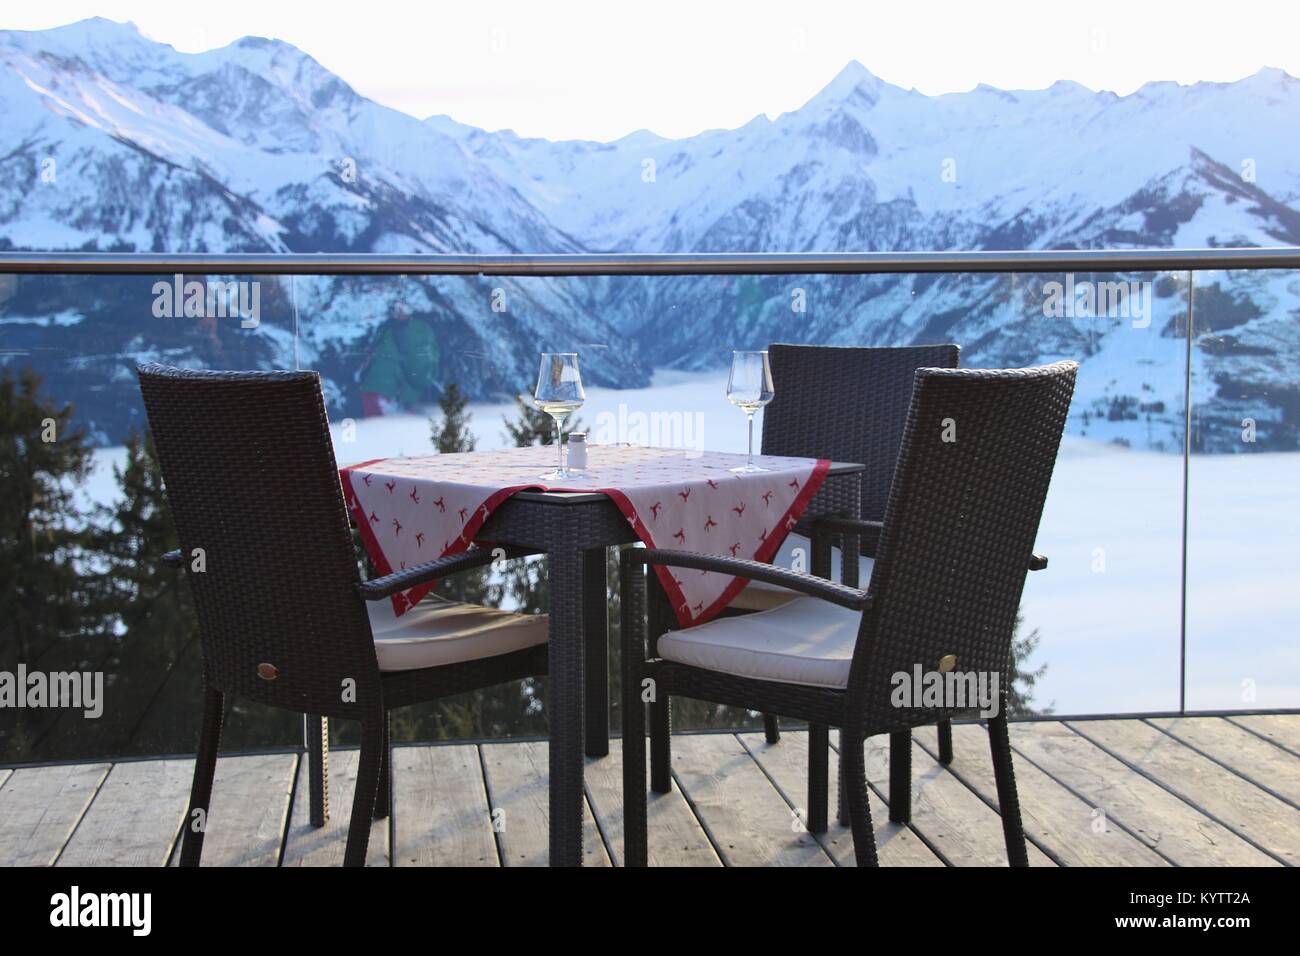 Chairs on a cafe terrace in the mountains and view of the Hohe Tauern mountain range in the region Zell am See - Kaprun, in winter. Austria, Europe. Stock Photo